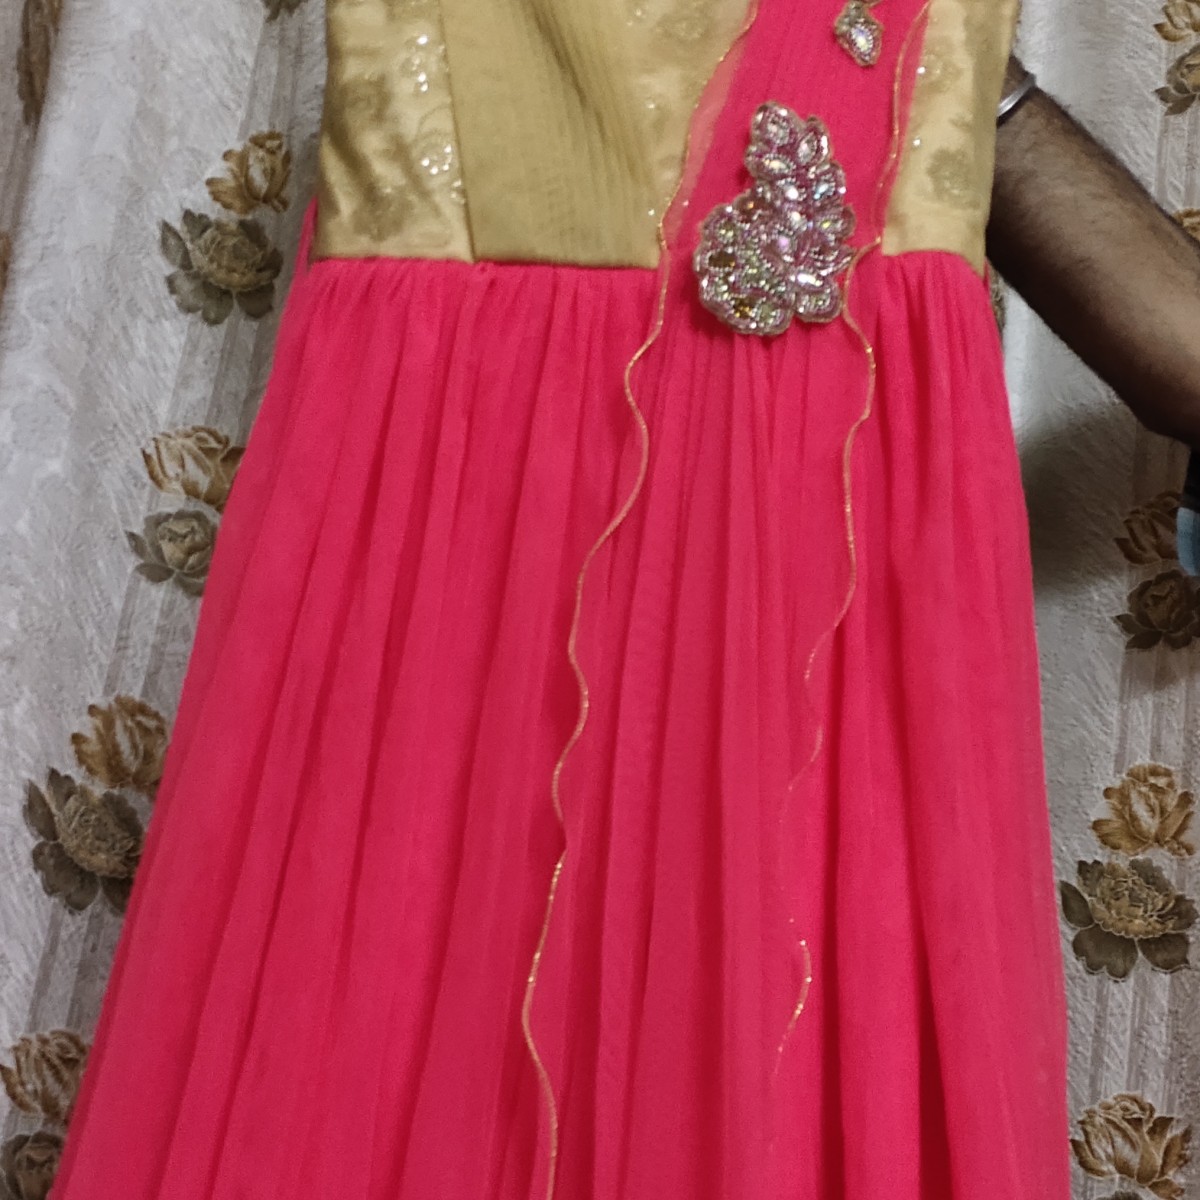 Girlish gown best for pageant